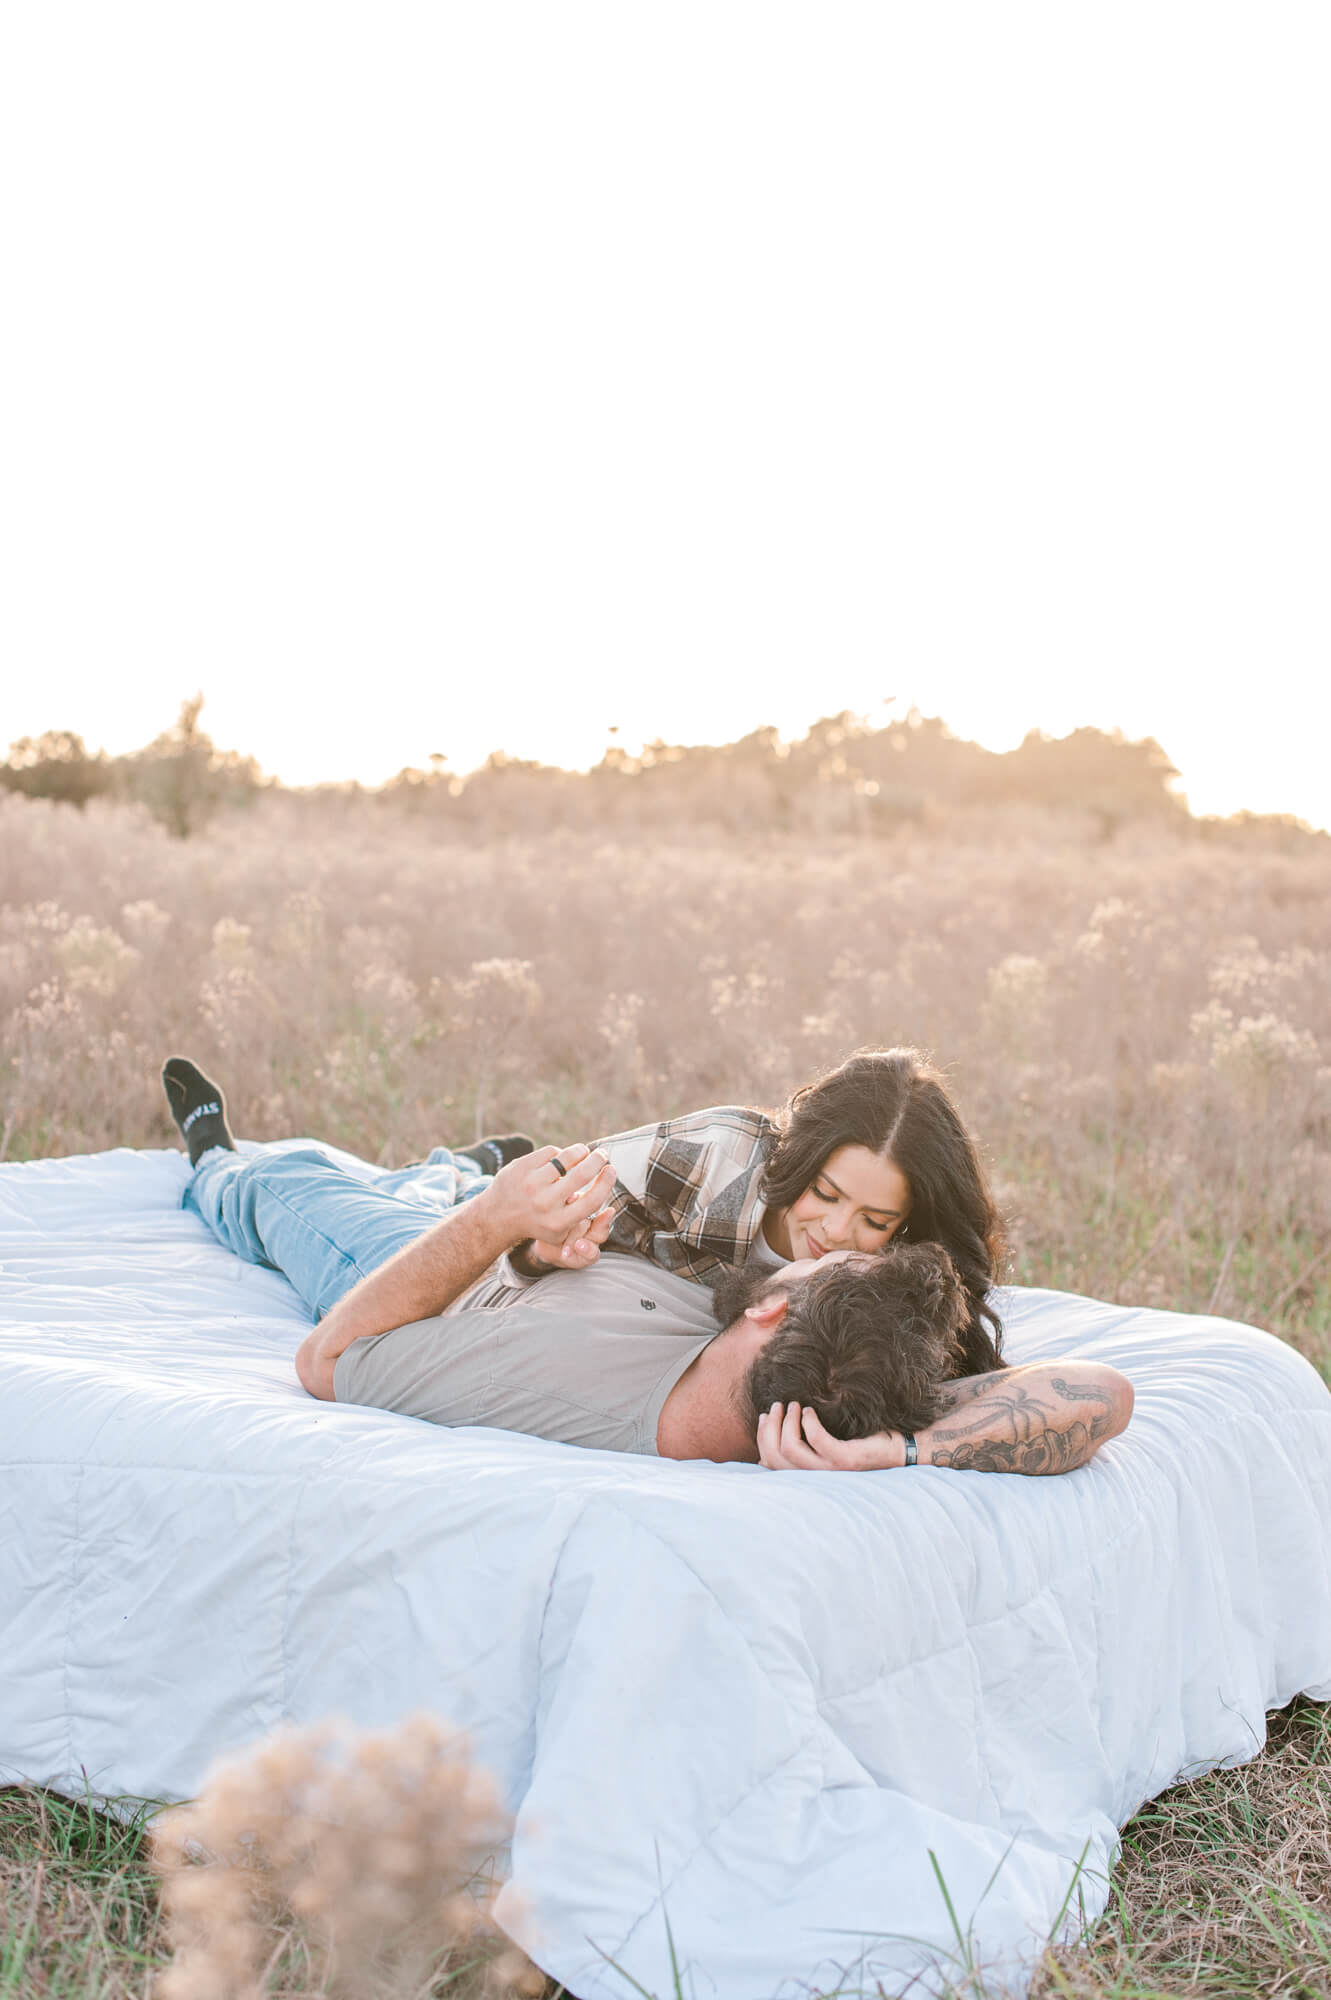 The cutest couple laying together in a field at sunset chatting about their favorite yoga studio, The Yoga Garden in Orlando, Florida. 